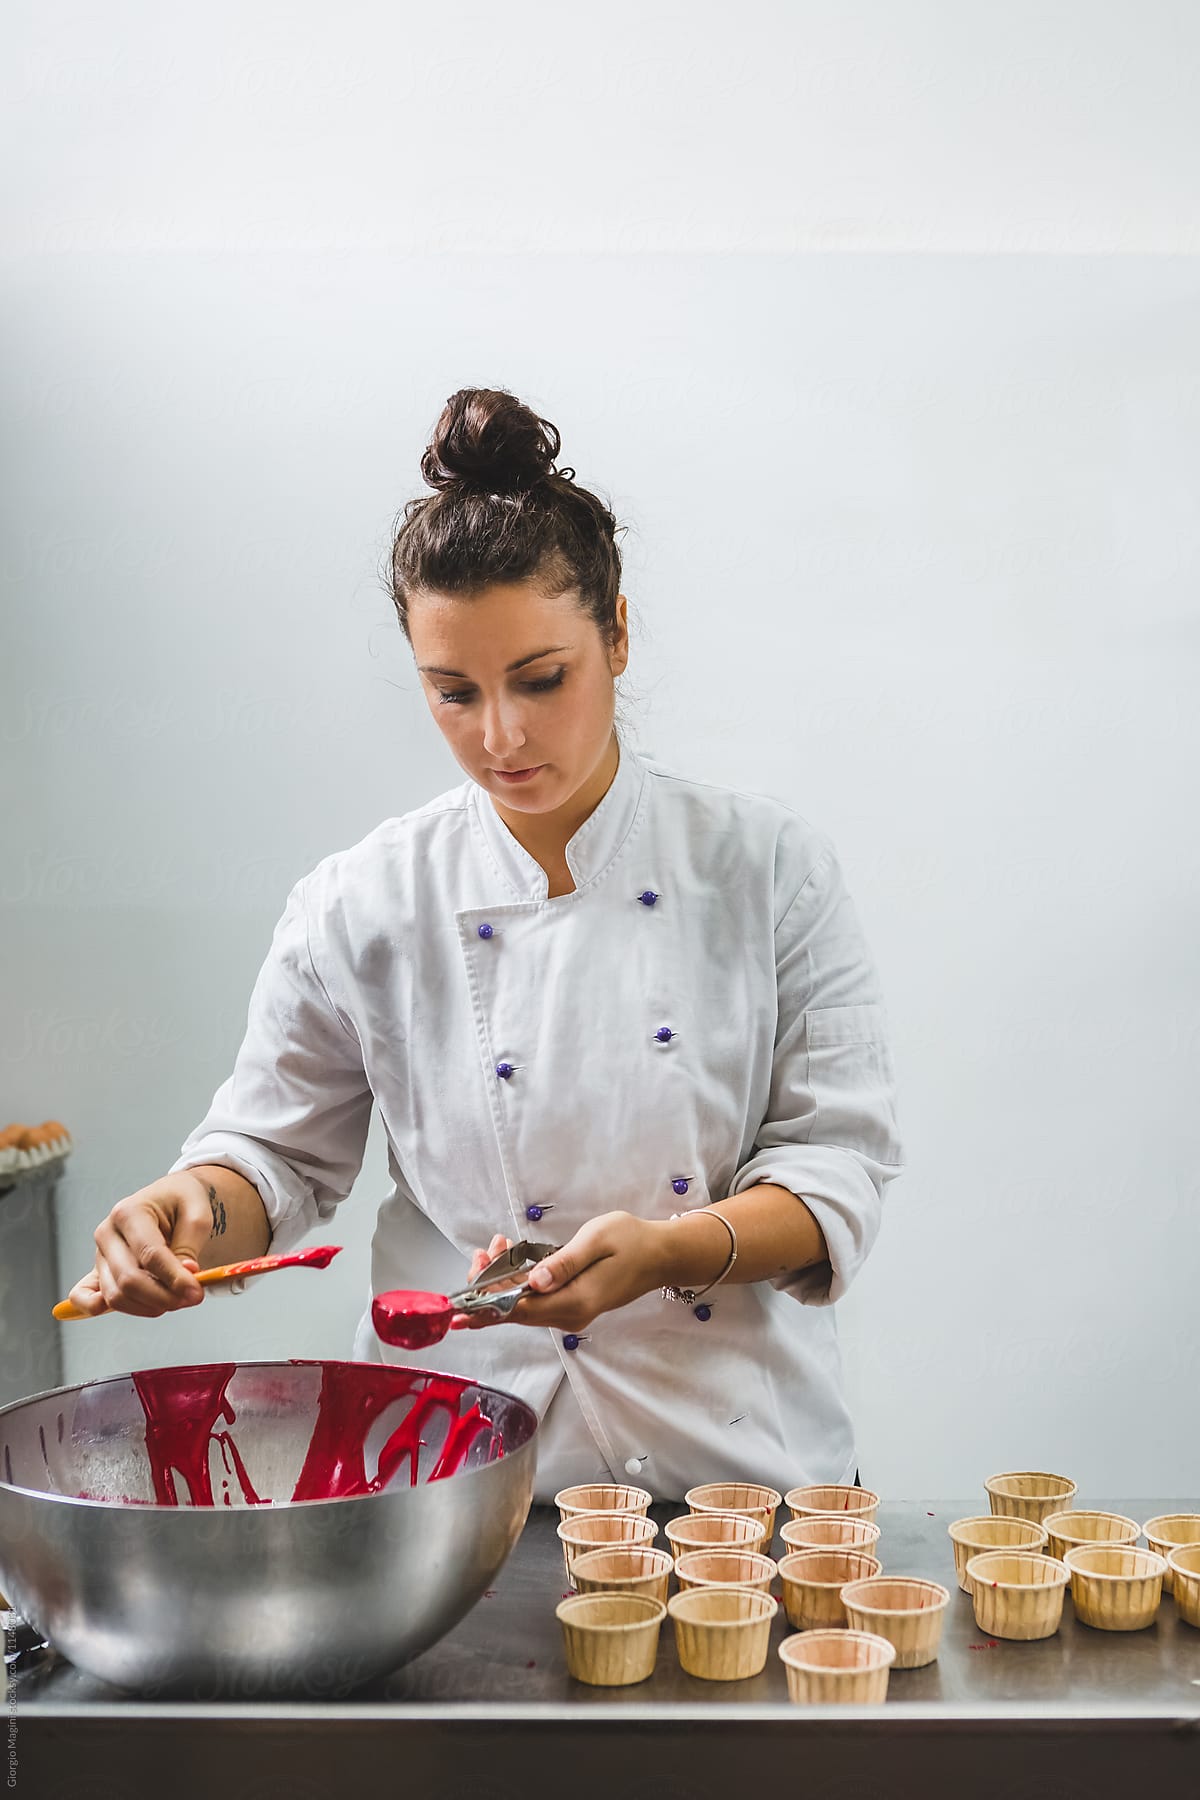 Woman Pastry Chef Preparing Red Batter Muffins To Bake by Stocksy